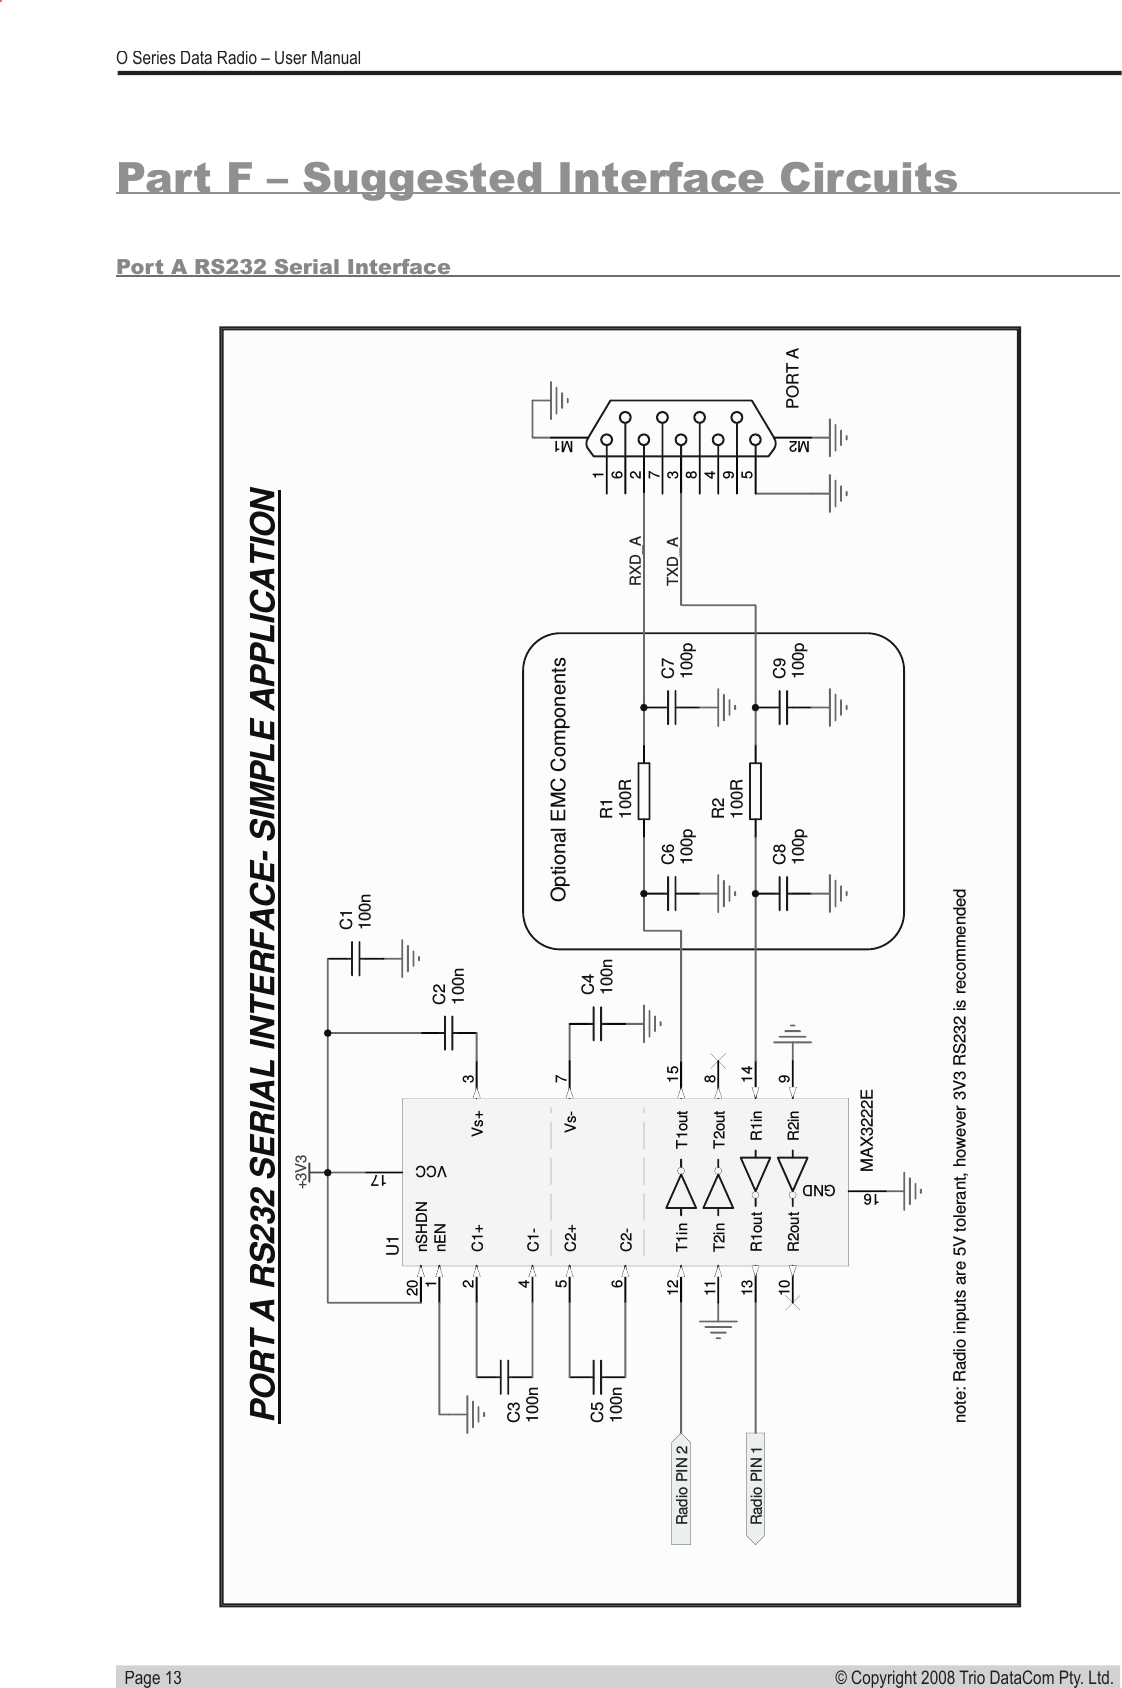   Page 13© Copyright 2008 Trio DataCom Pty. Ltd. O Series Data Radio – User ManualPORT A RS232 SERIAL INTERFACE- SIMPLE APPLICATIONC8100pR2100RC9100pC6100pR1100RC7100pRXD_ATXD_A+3V3Radio PIN 2Radio PIN 1C1100nC2100nC4100n162738495M2 M1PORT AC3100nC5100nOptional EMC ComponentsC1+2C1-4C2+5C2-6Vs+ 3Vs- 7VCC 17GND16T1in12 T1out 15T2in11 T2out 8R1out13 R1in 14R2out10 R2in 9nEN1nSHDN20U1MAX3222Enote: Radio inputs are 5V tolerant, however 3V3 RS232 is recommended Part F – Suggested Interface CircuitsPort A RS232 Serial Interface